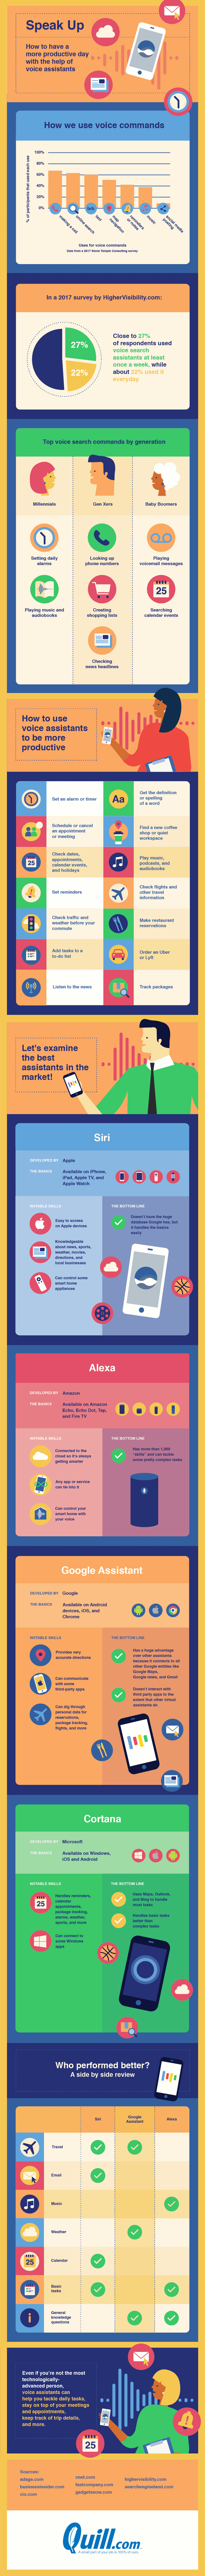 Speak Up: How to have a more productive day with the help of voice assistants #infographic